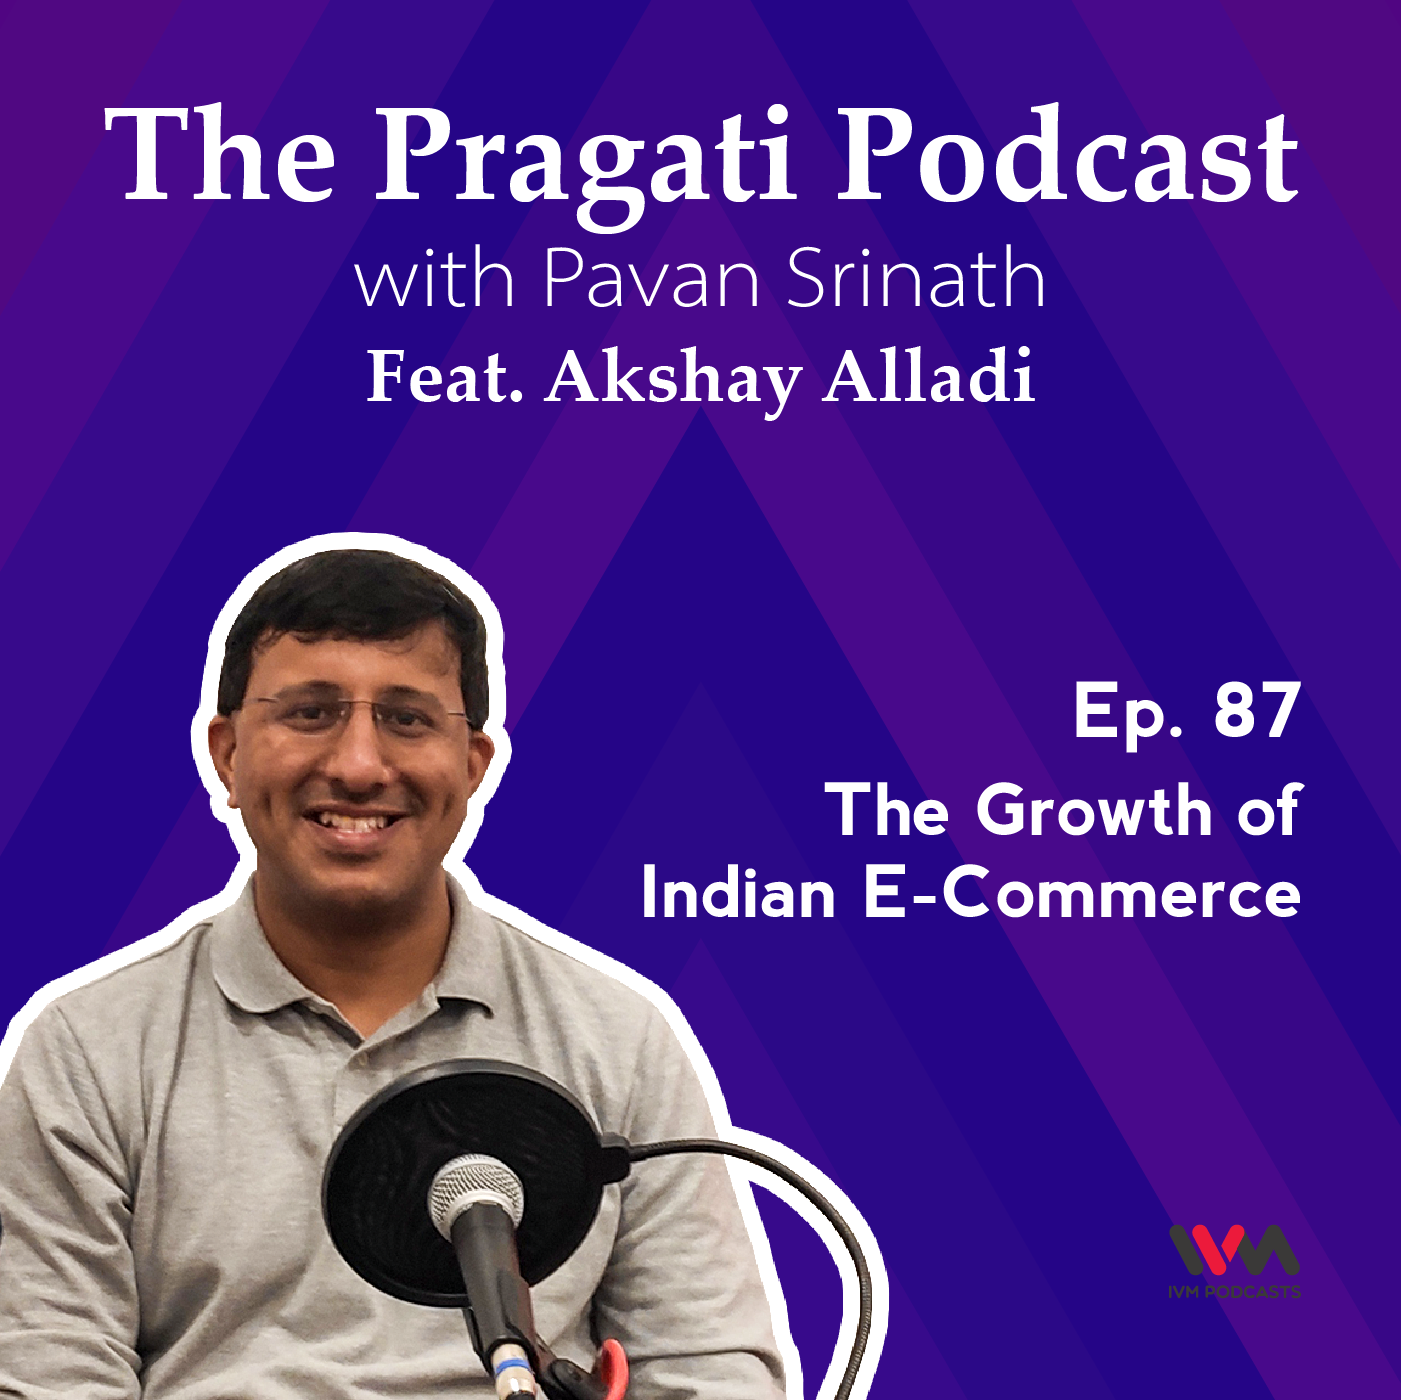 Ep. 87: The Growth of Indian E-Commerce